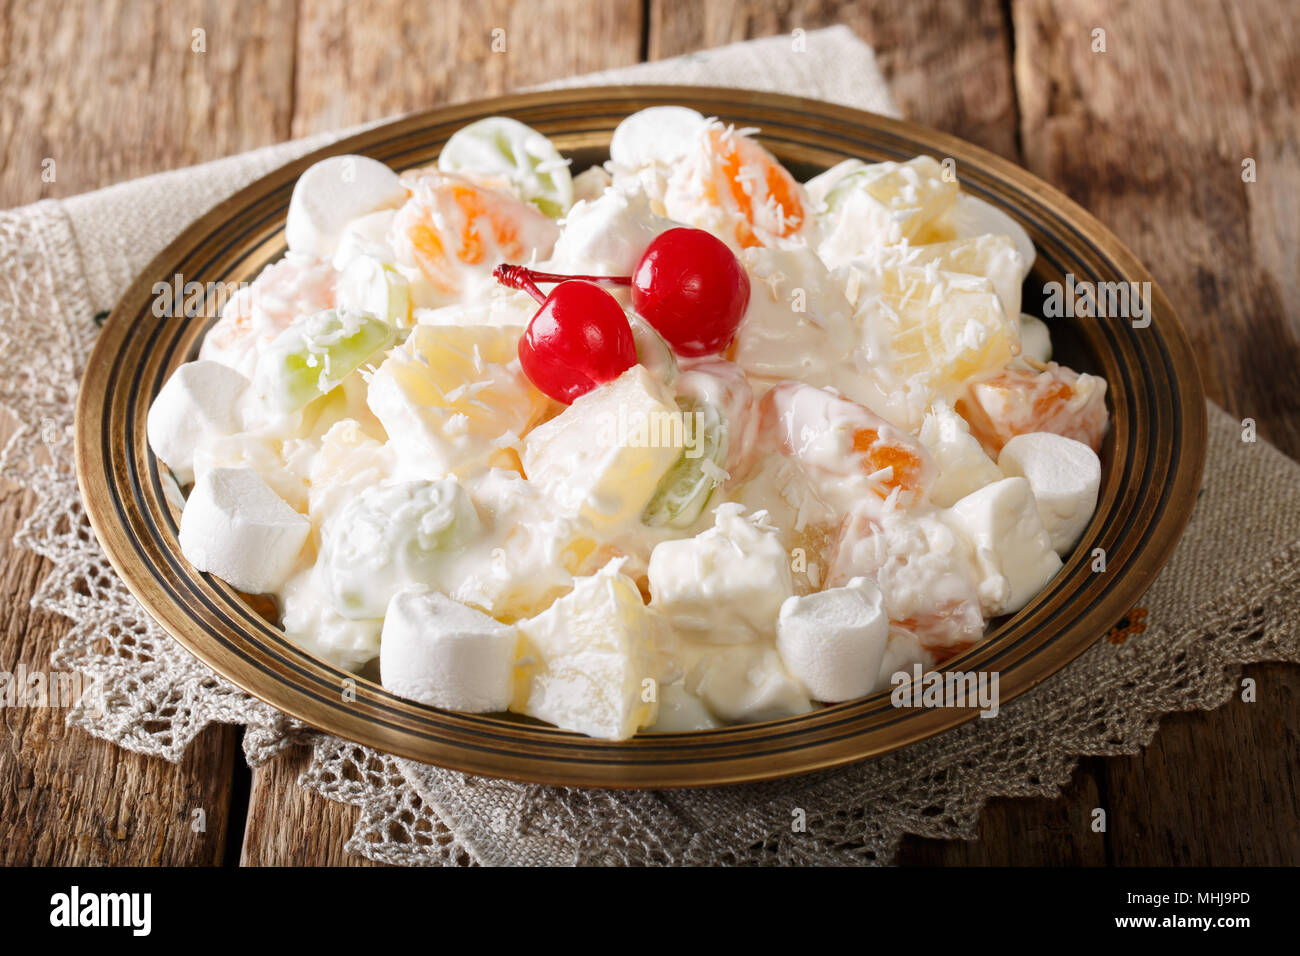 fruit salad from pineapple, oranges, grapes and coconut with marshmallow and vanilla yogurt close-up on a plate. horizontal Stock Photo